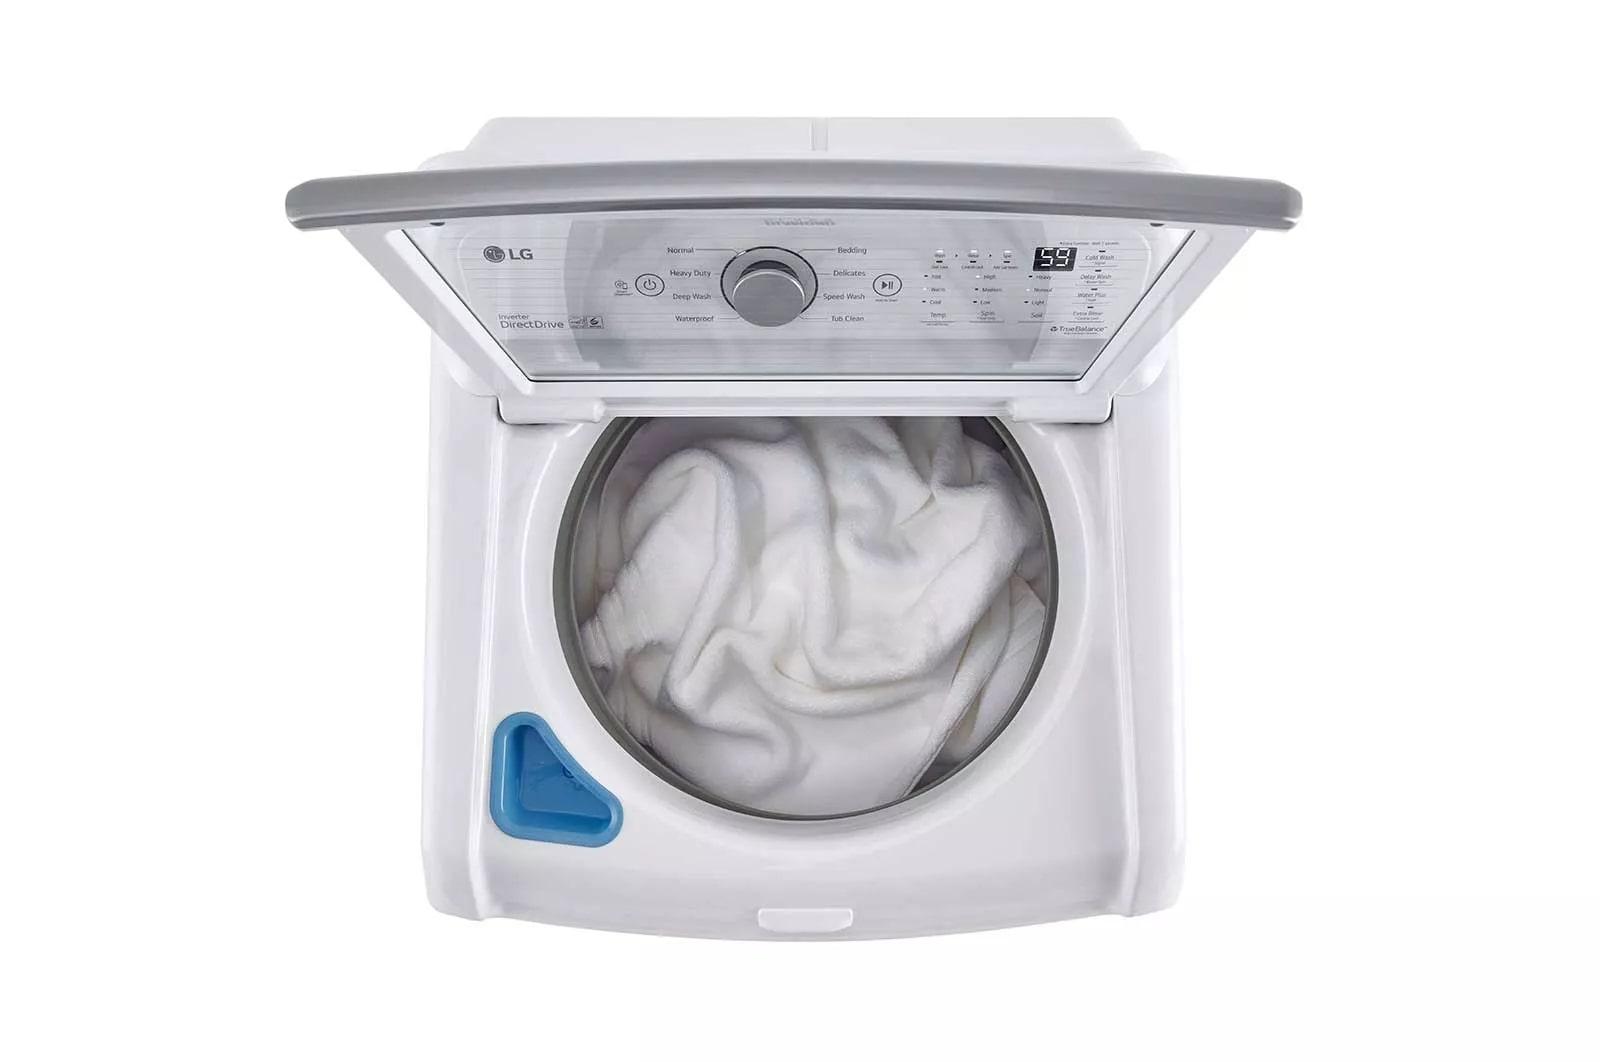 Lg Wt7150c 27" Wide 5 Cu. Ft. Energy Star Certified Top Loading Washing Machine - White - image 4 of 5